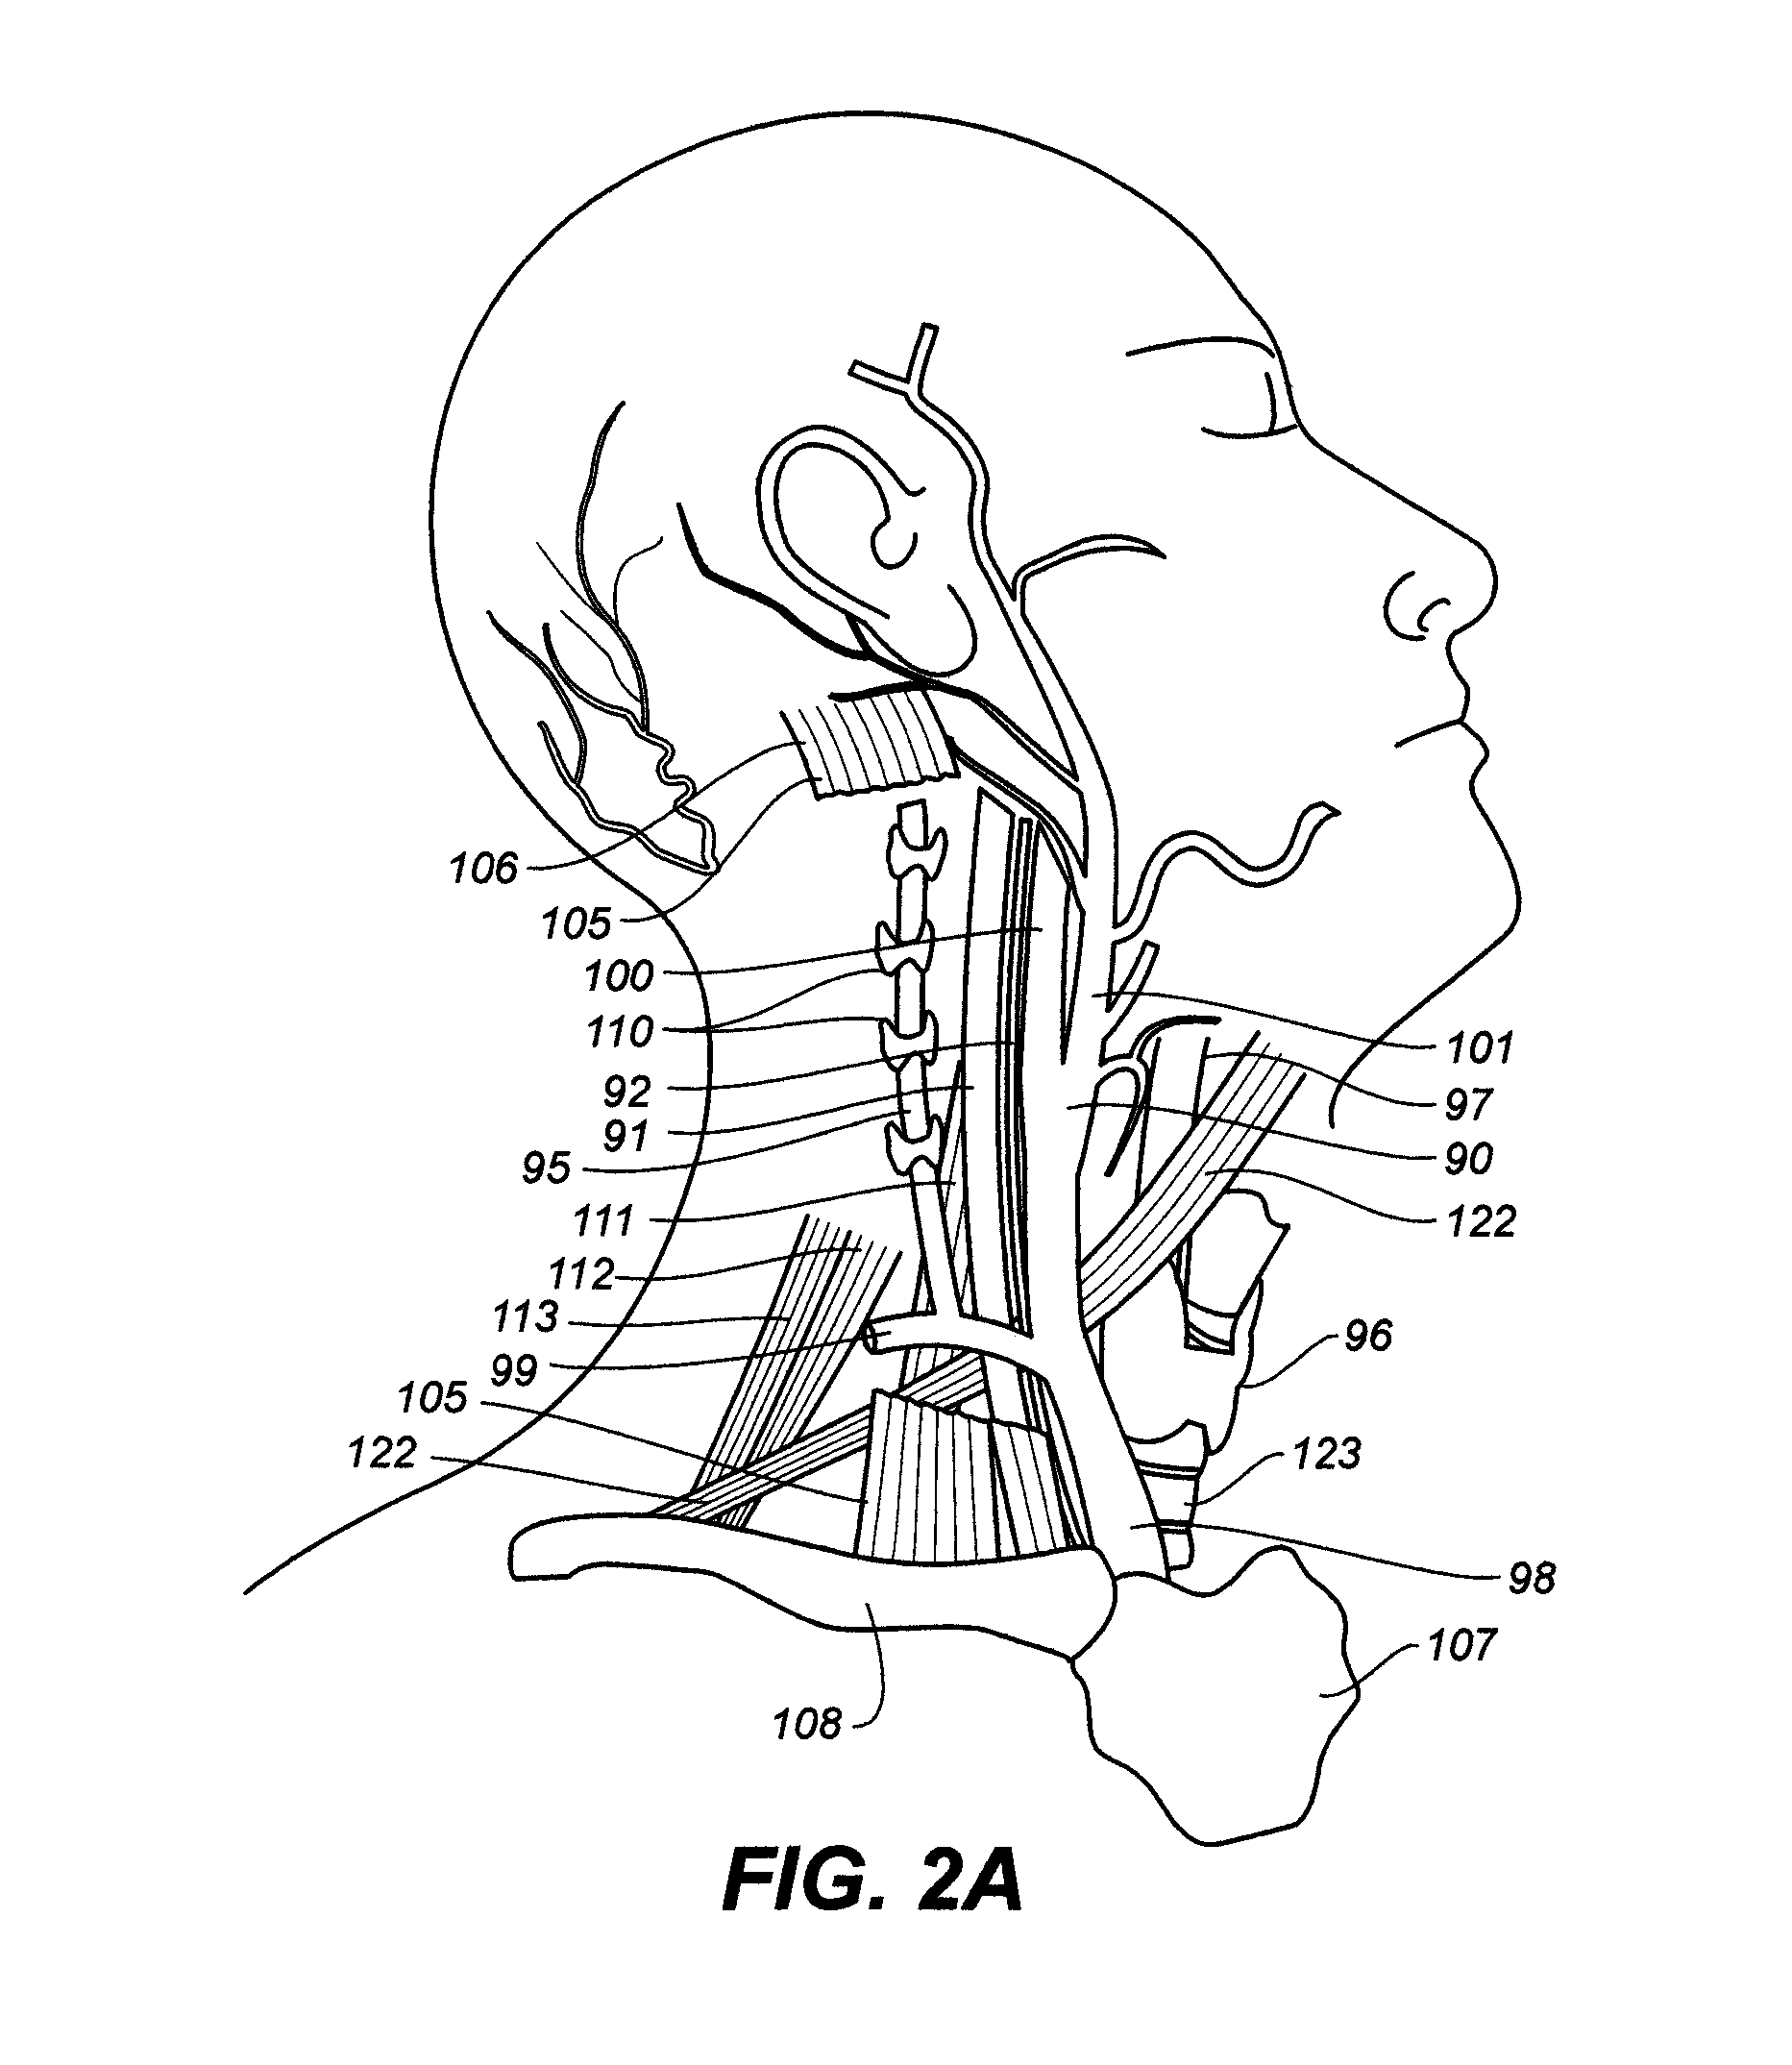 Endovascular catheter with multiple capabilities